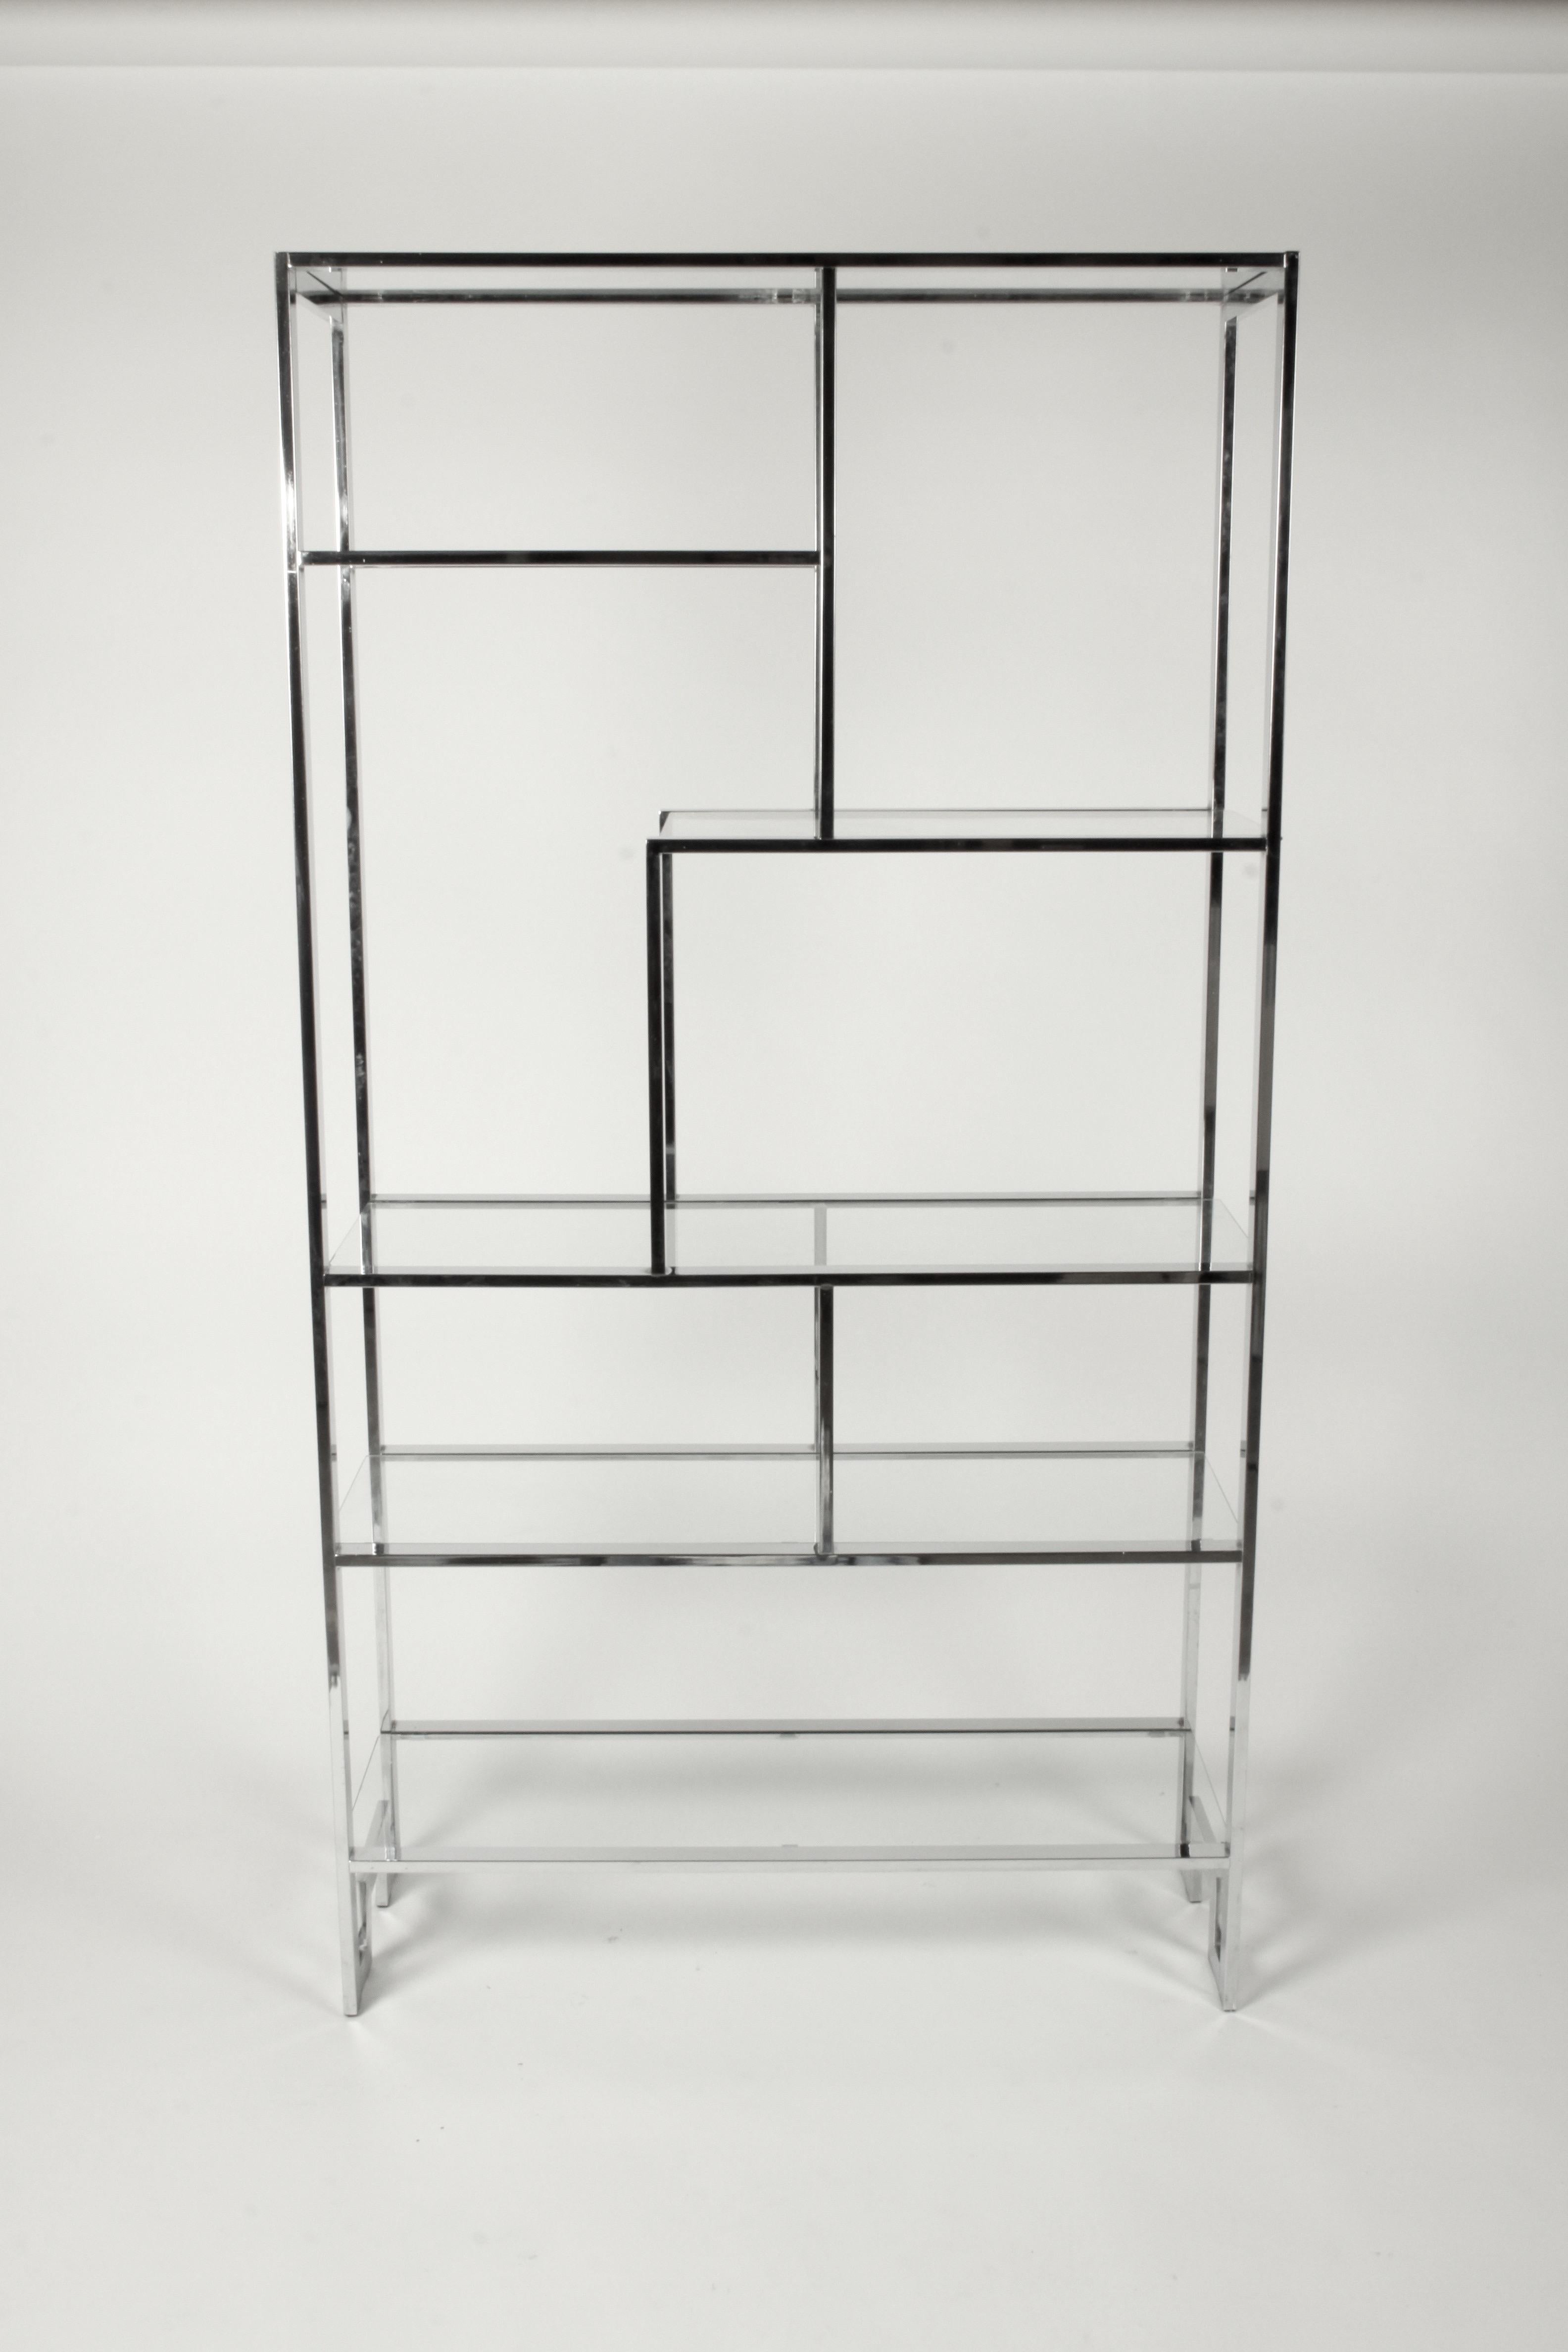 1970's chrome geometric configuration étagère by DIA or Design Institute of America with glass shelves and Greek key detail in base. Very nice original condition, chrome is bright, few minor chips to edges of glass and light scratches. In the style